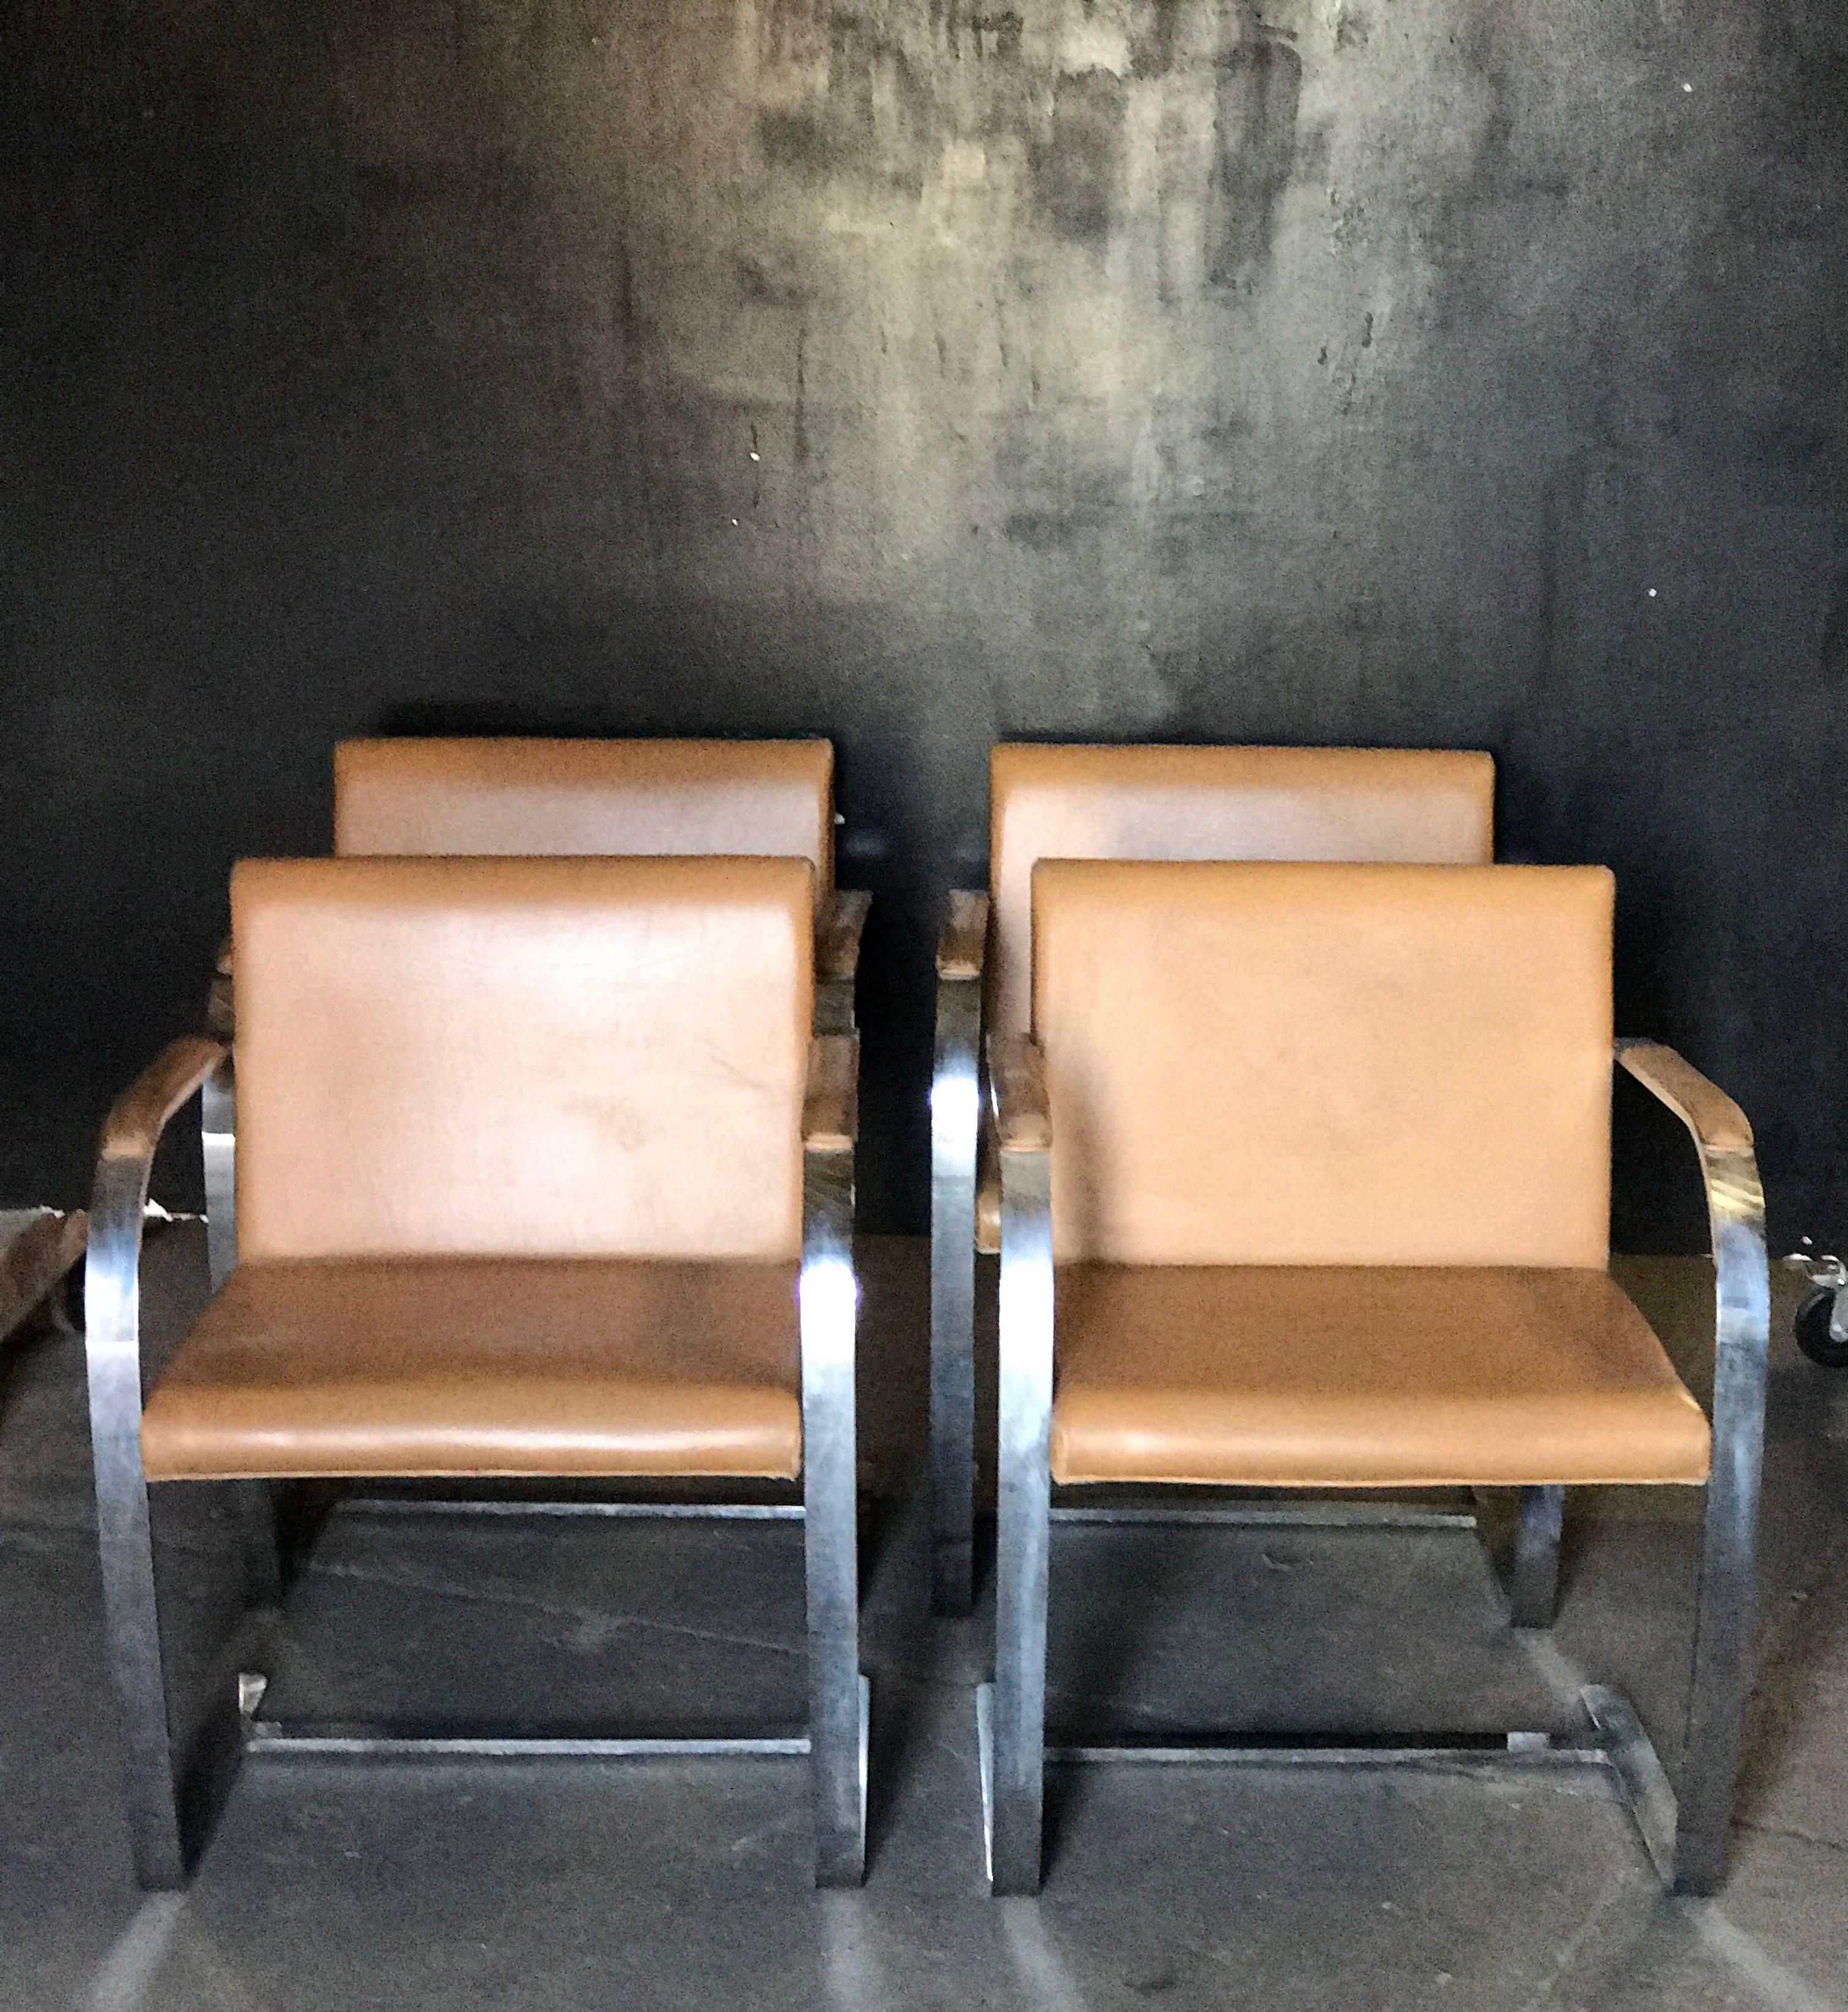 Ludwig Mies van der Rohe's flat bar Brno chair is comprised of polished chrome-plated steel and leather, made circa 1960s by Knoll. These chairs retain their original light brown leather upholstery.